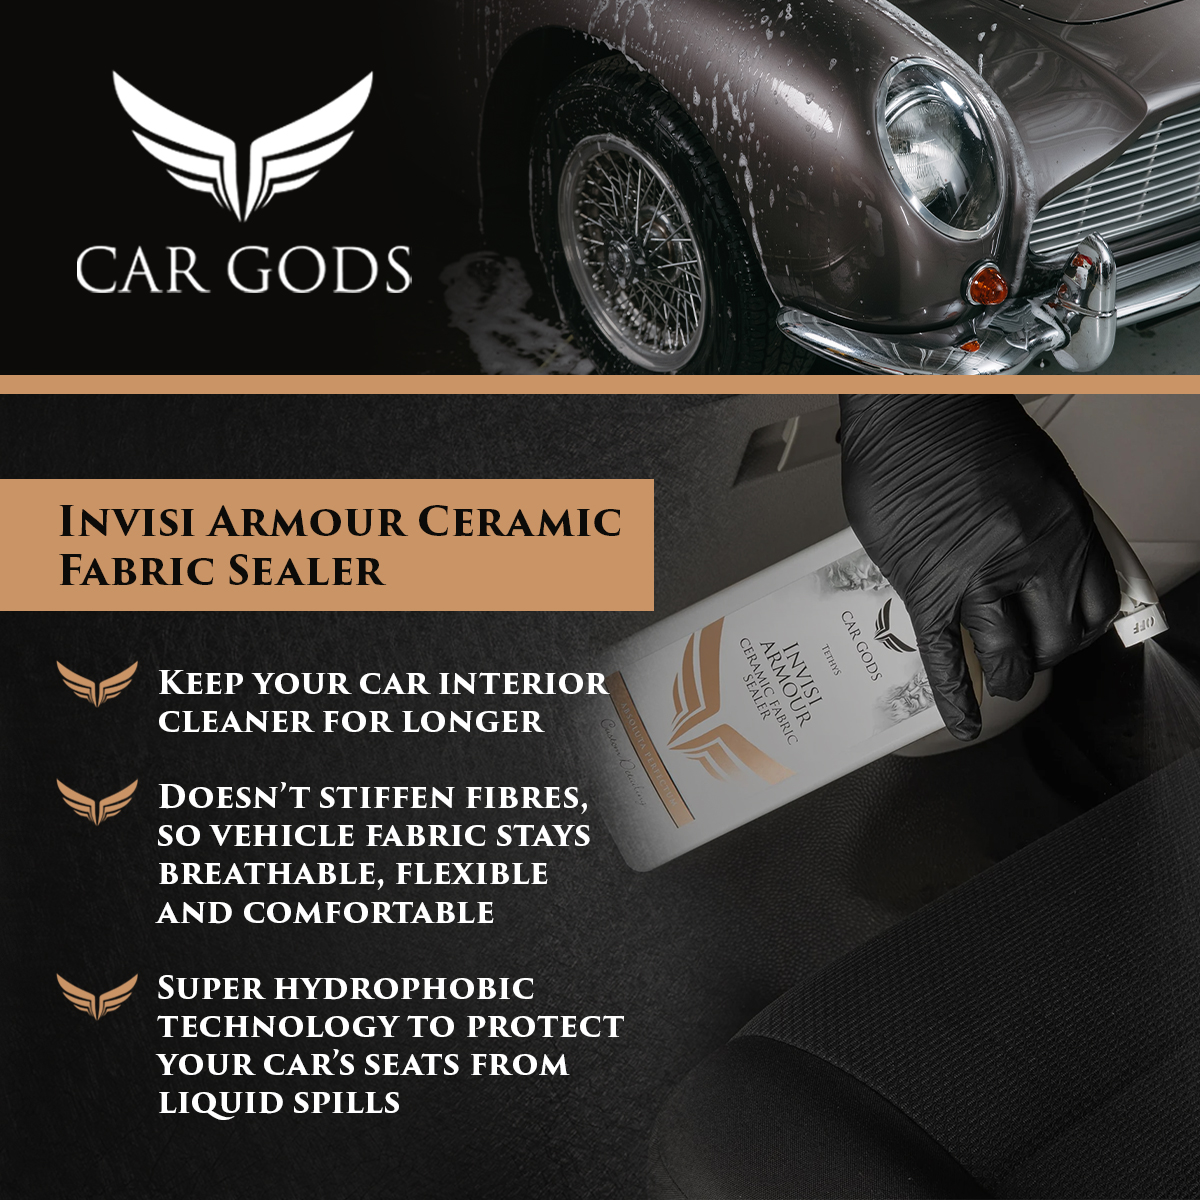 Car Gods Invisi Armour Ceramic Fabric Sealer. Super hydrophobic ceramic protection for your vehicle’s fabric surfaces. Fabric stays breathable, flexible and cleaner for longer.